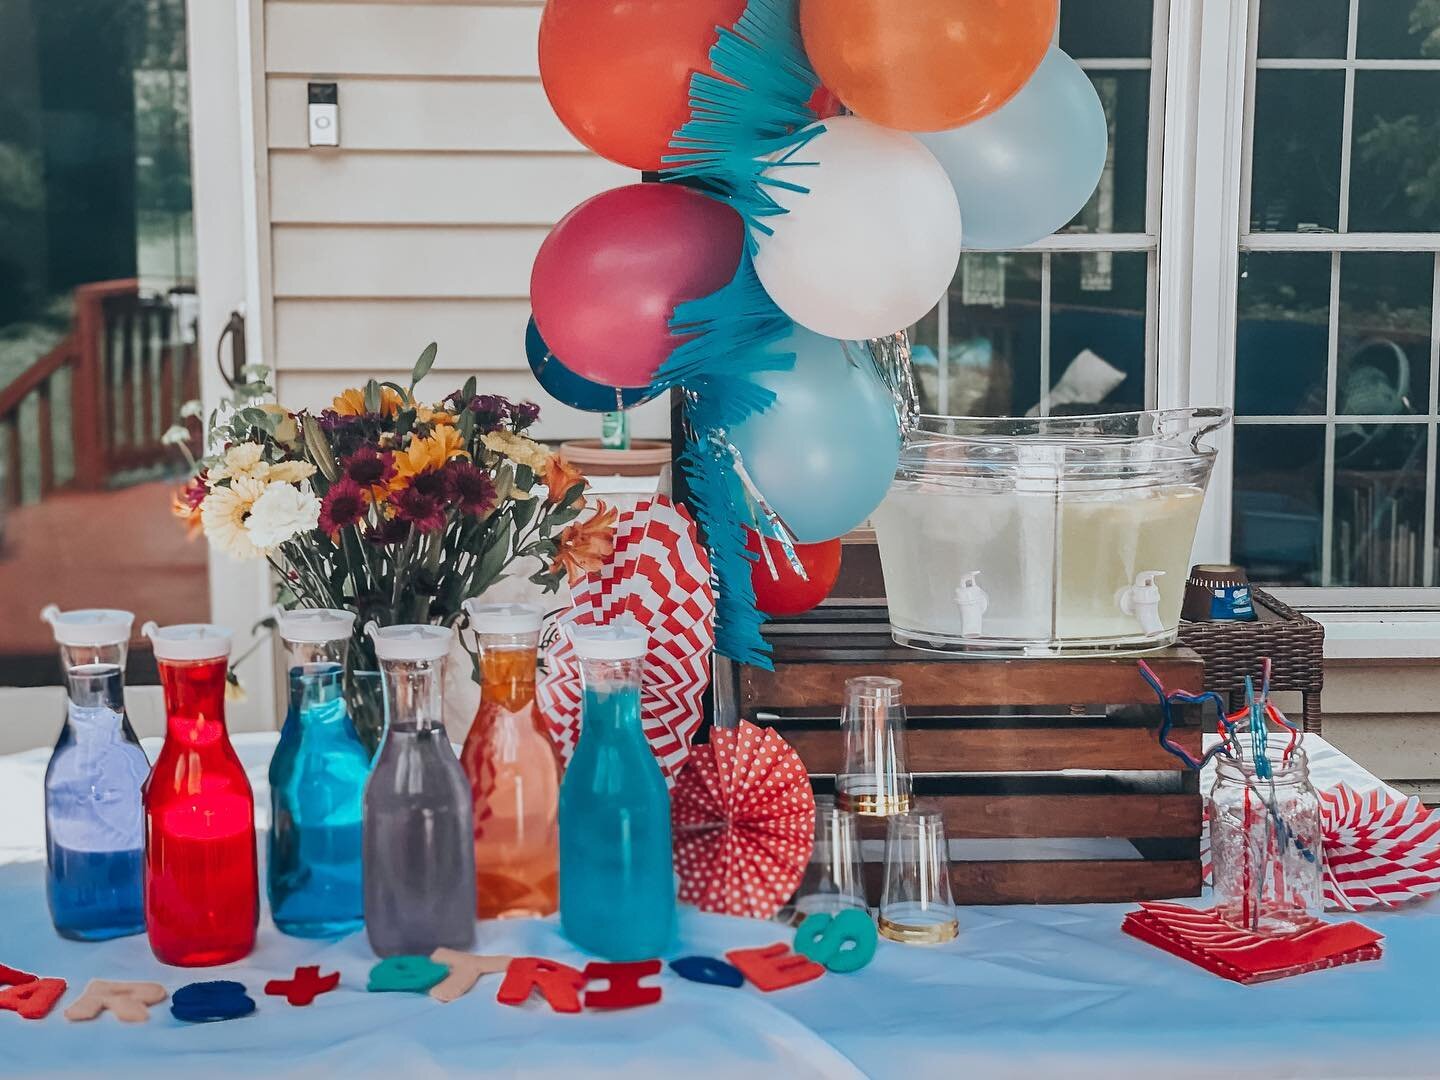 4th of July Lemonade Bar 🍋 

Inspiration:
We are on the second day of #3daystohost and today we are bringing you 4th of July recipes. In sticking with this years theme of Red, White, and Rainbow 🌈, I created a rainbow lemonade bar. 

You know me, I